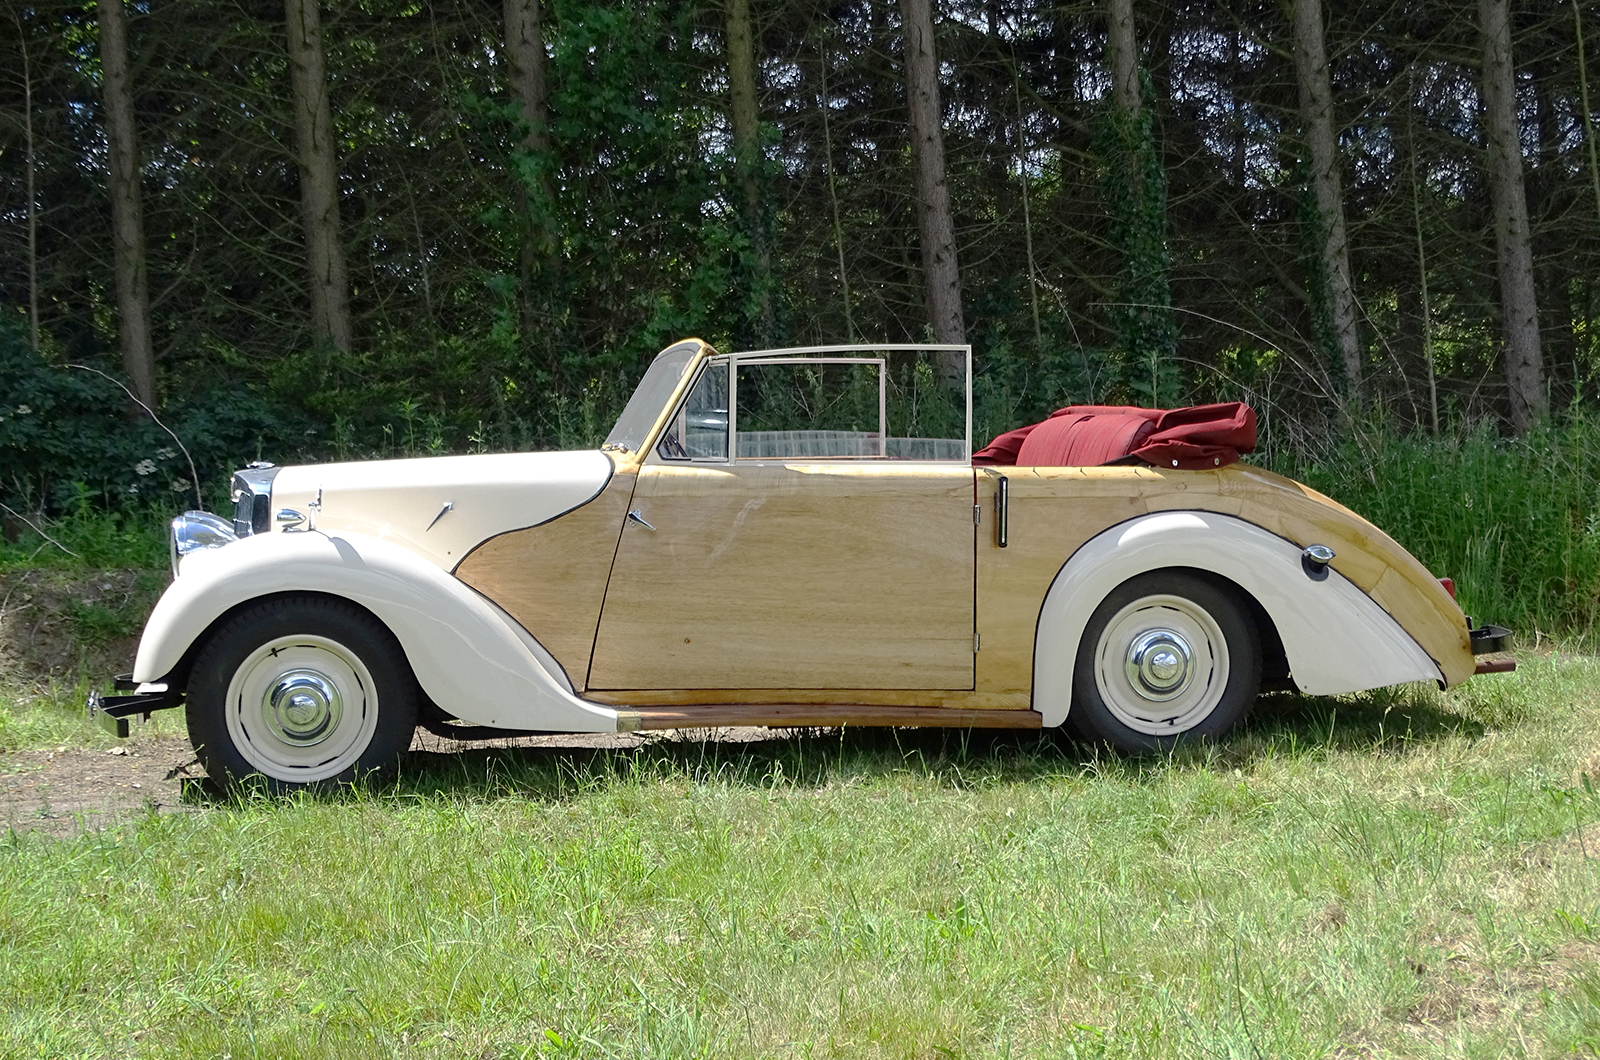 This 1947 Lea-Francis was The Beatles’ ticket to ride